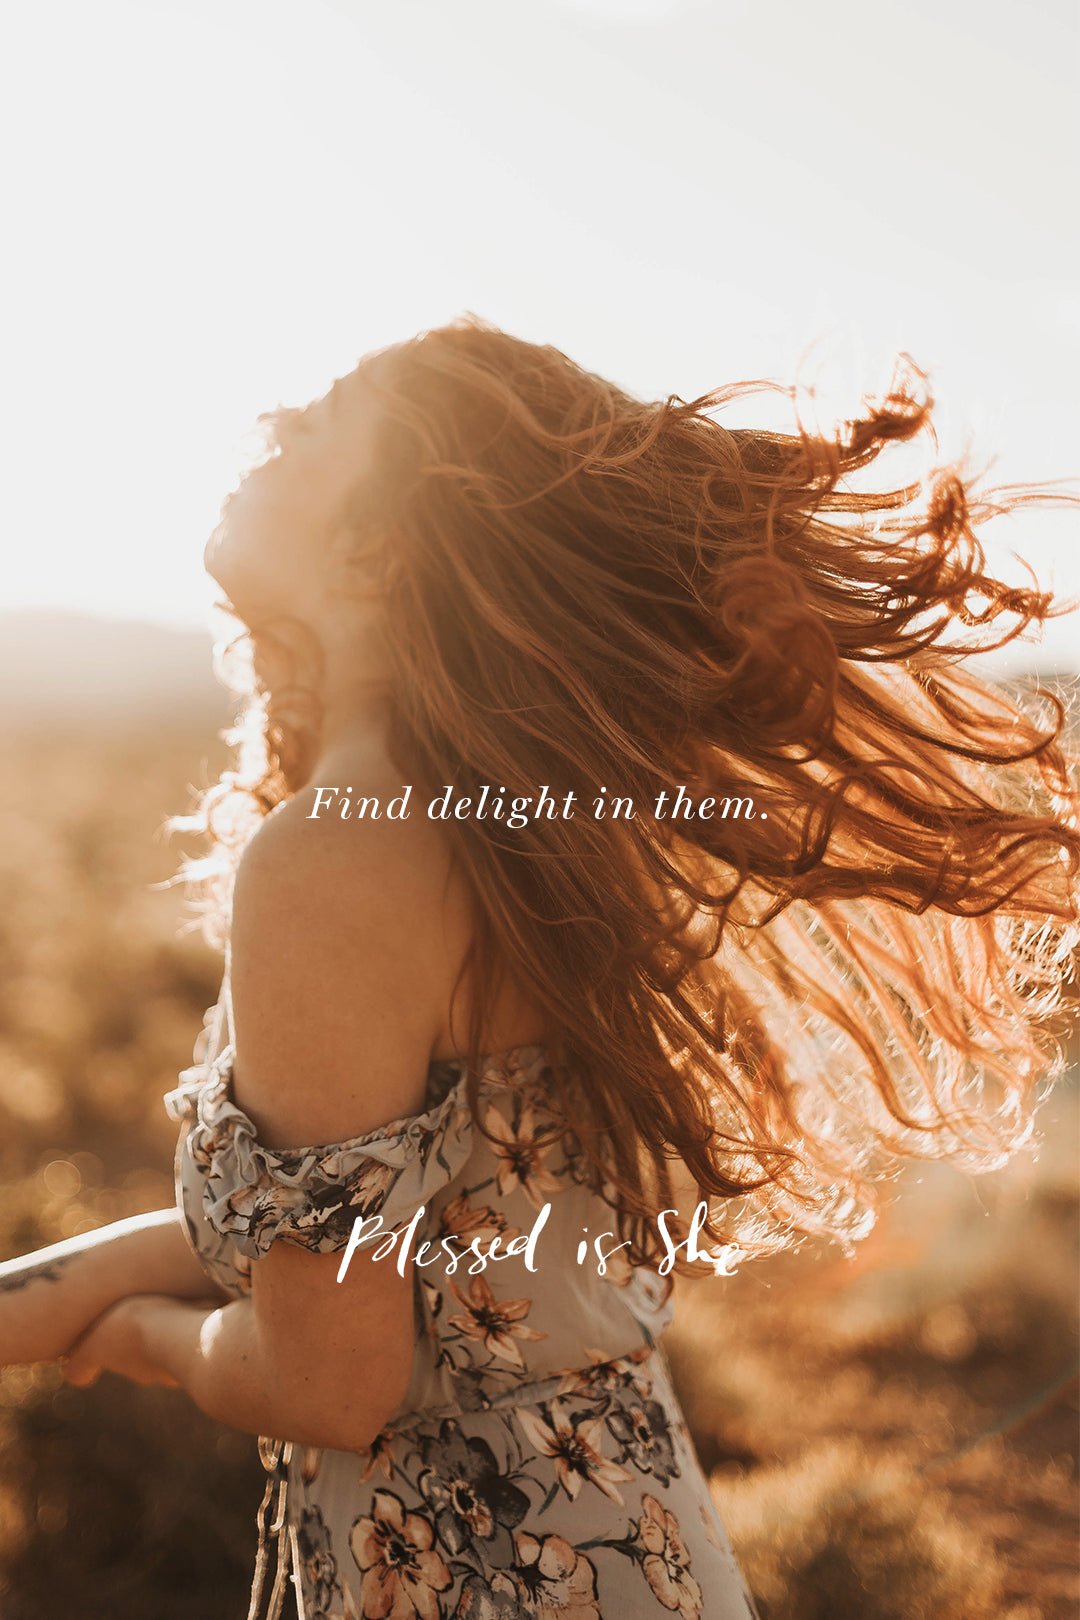 Showing Our Delight - Blessed Is She